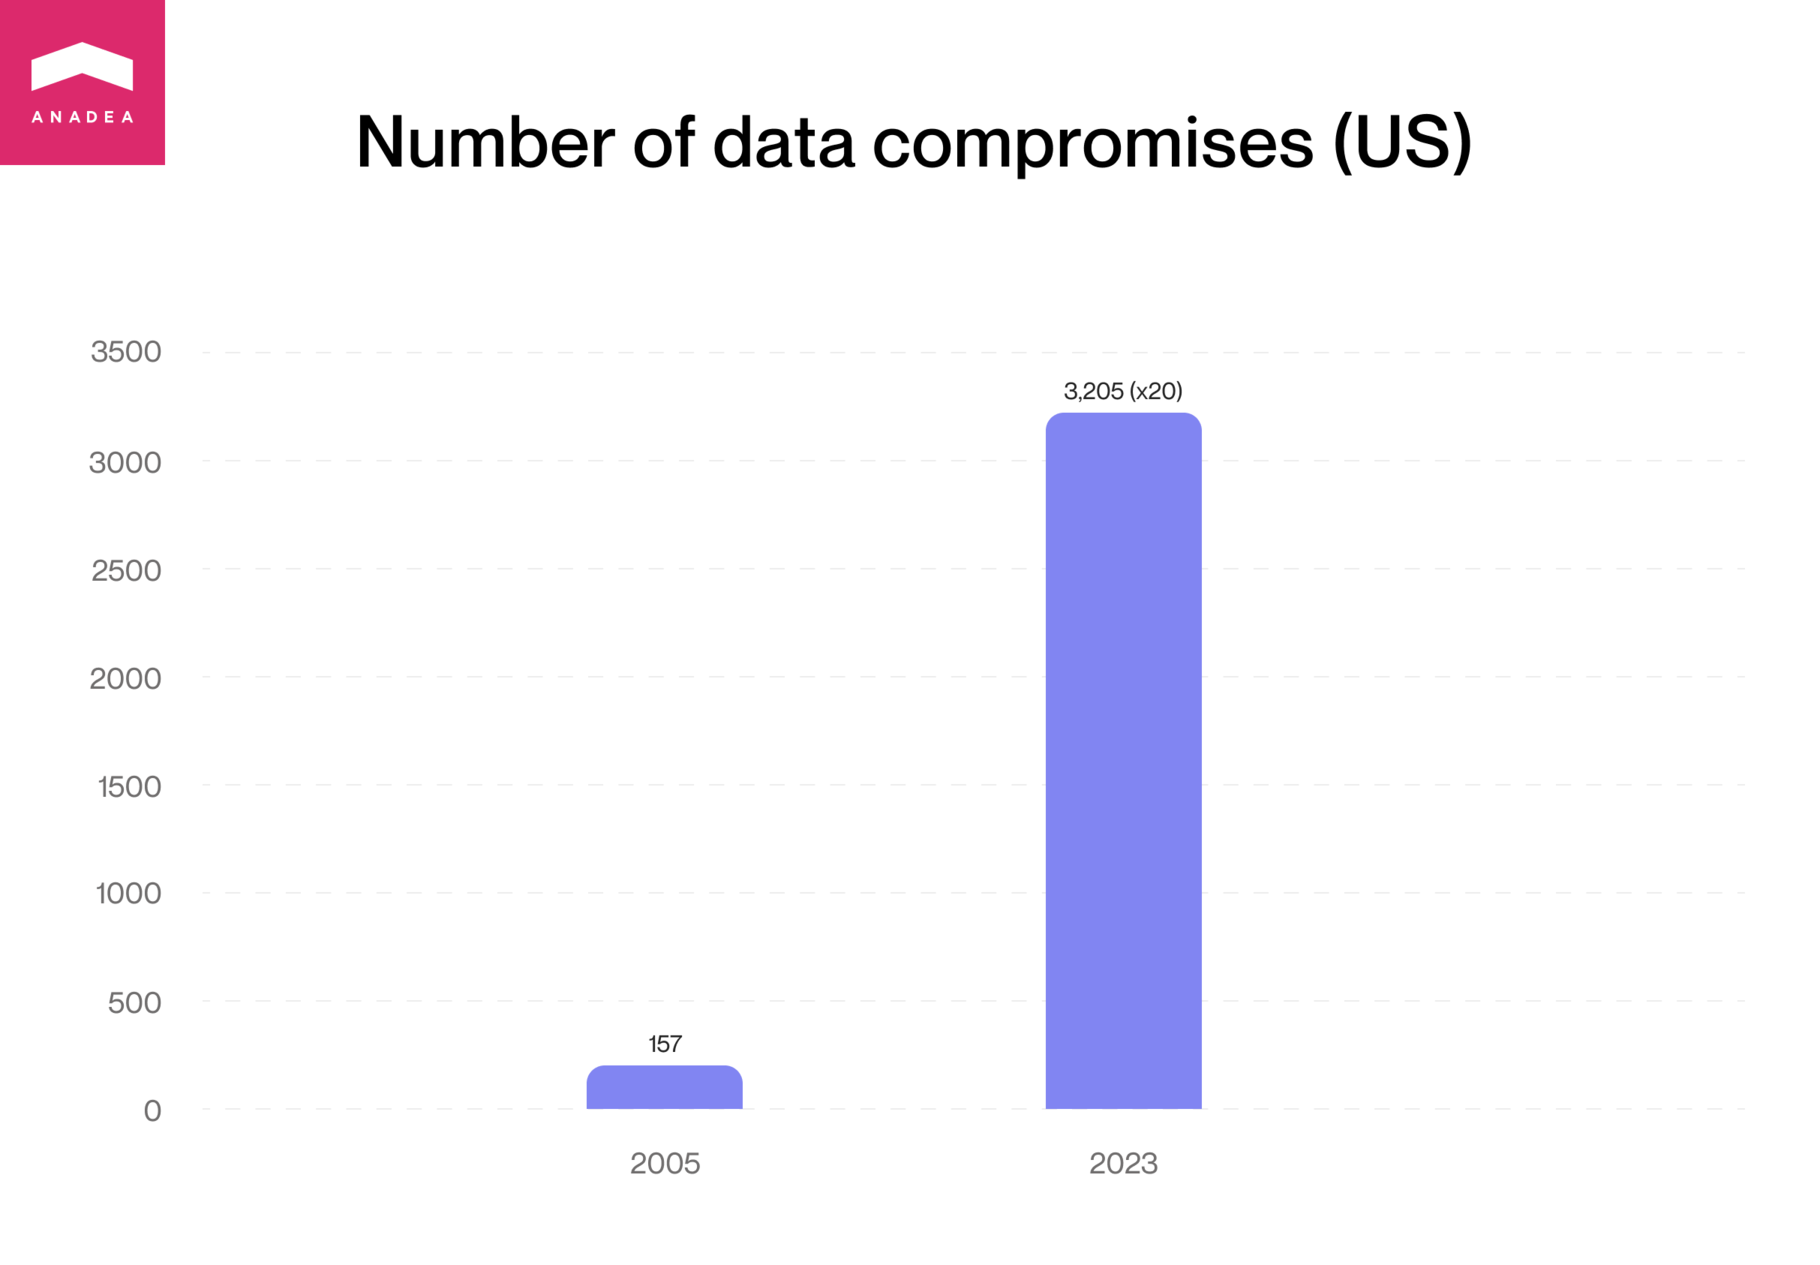 Number of data compromises in the US